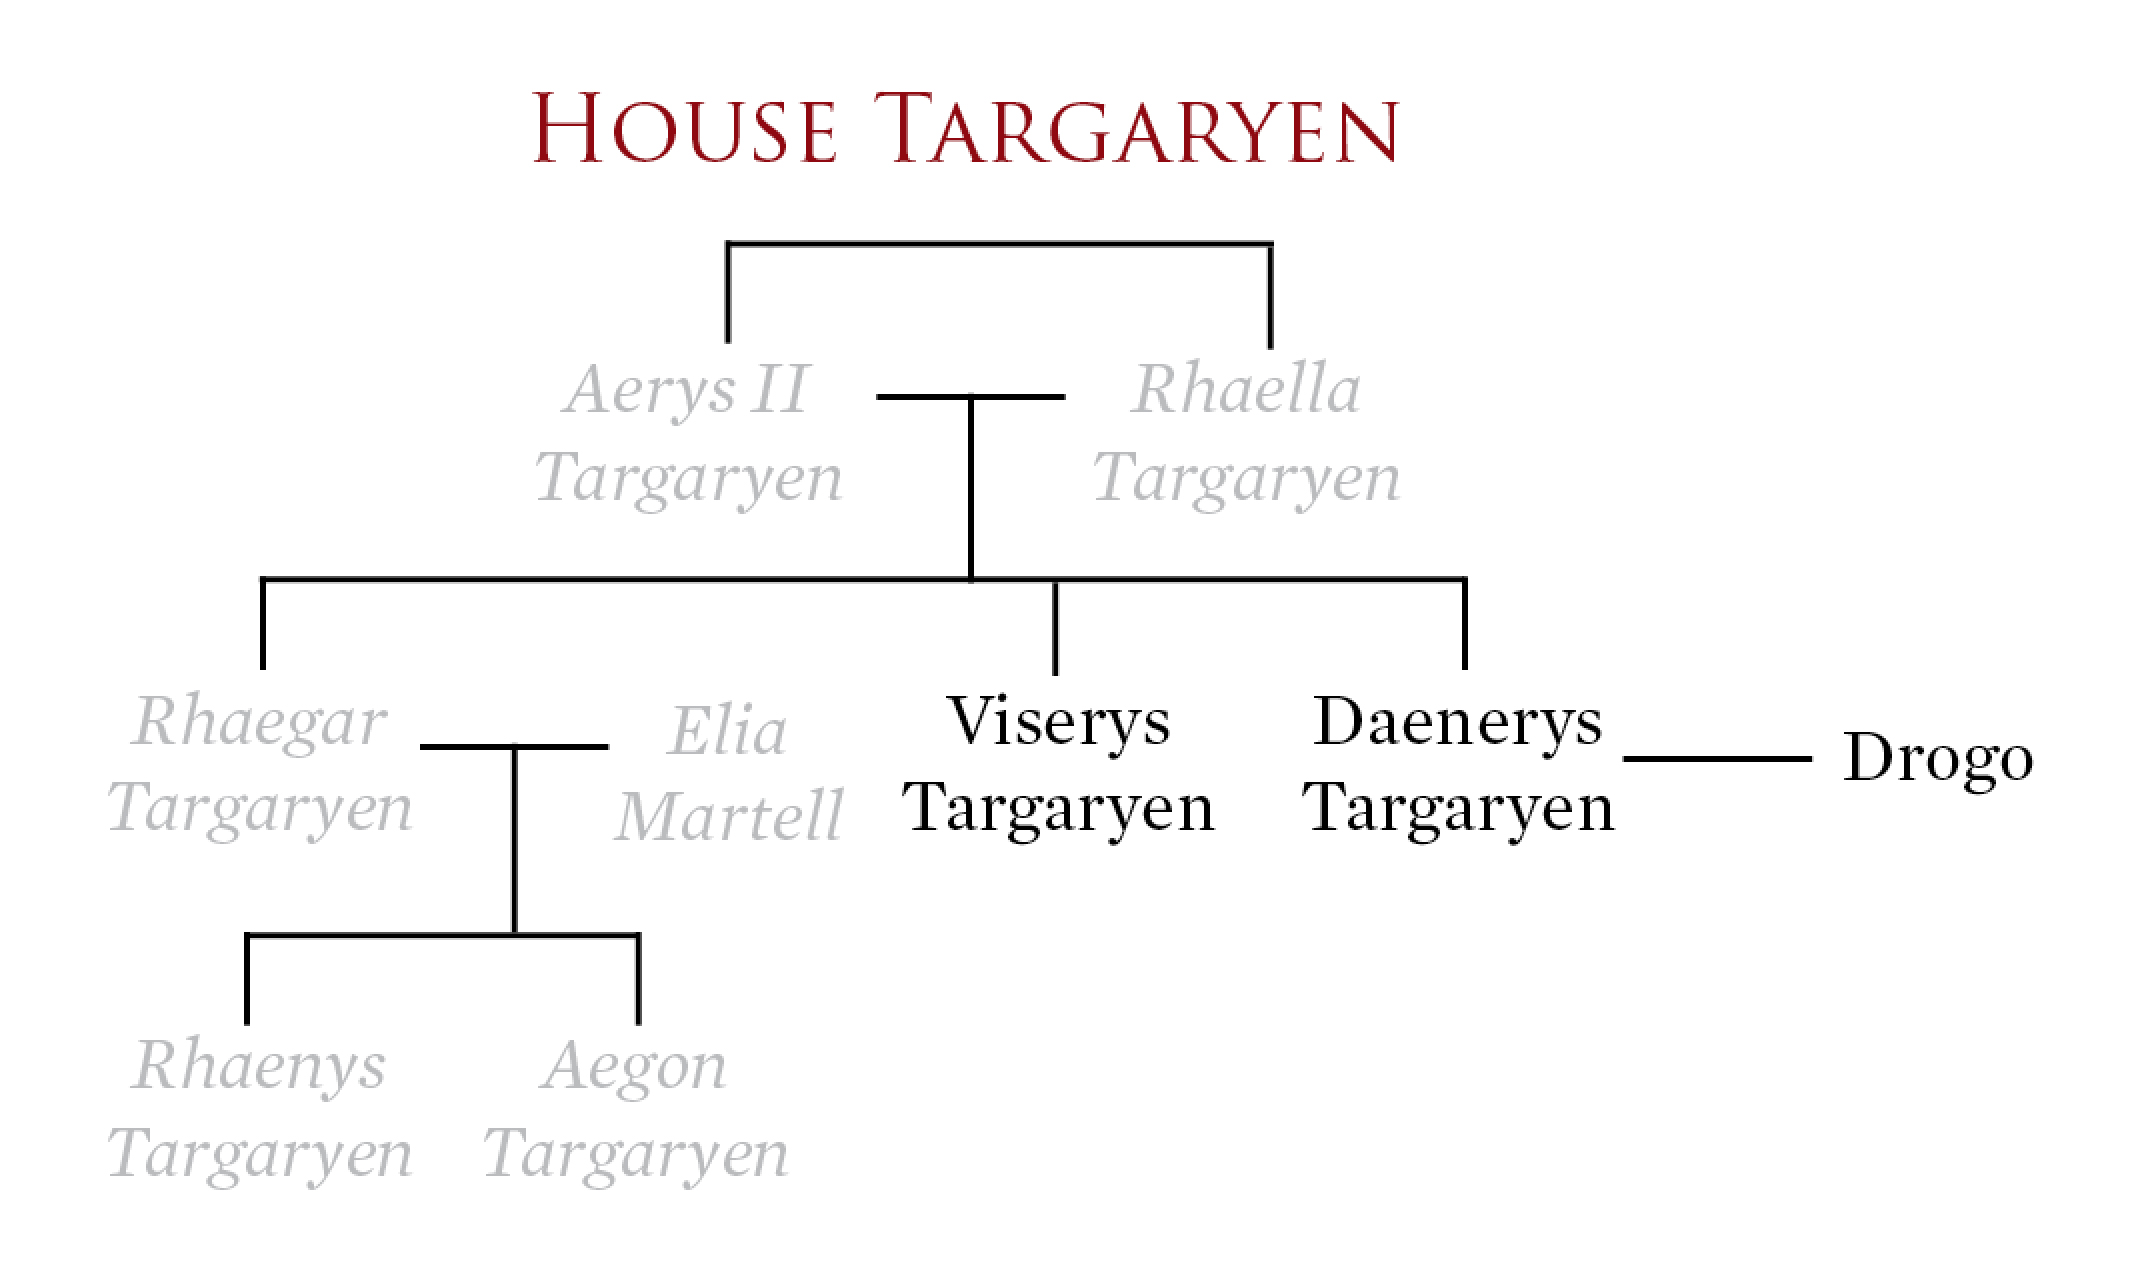 You'll find many empty branches in the once-powerful Targaryen family tree. 